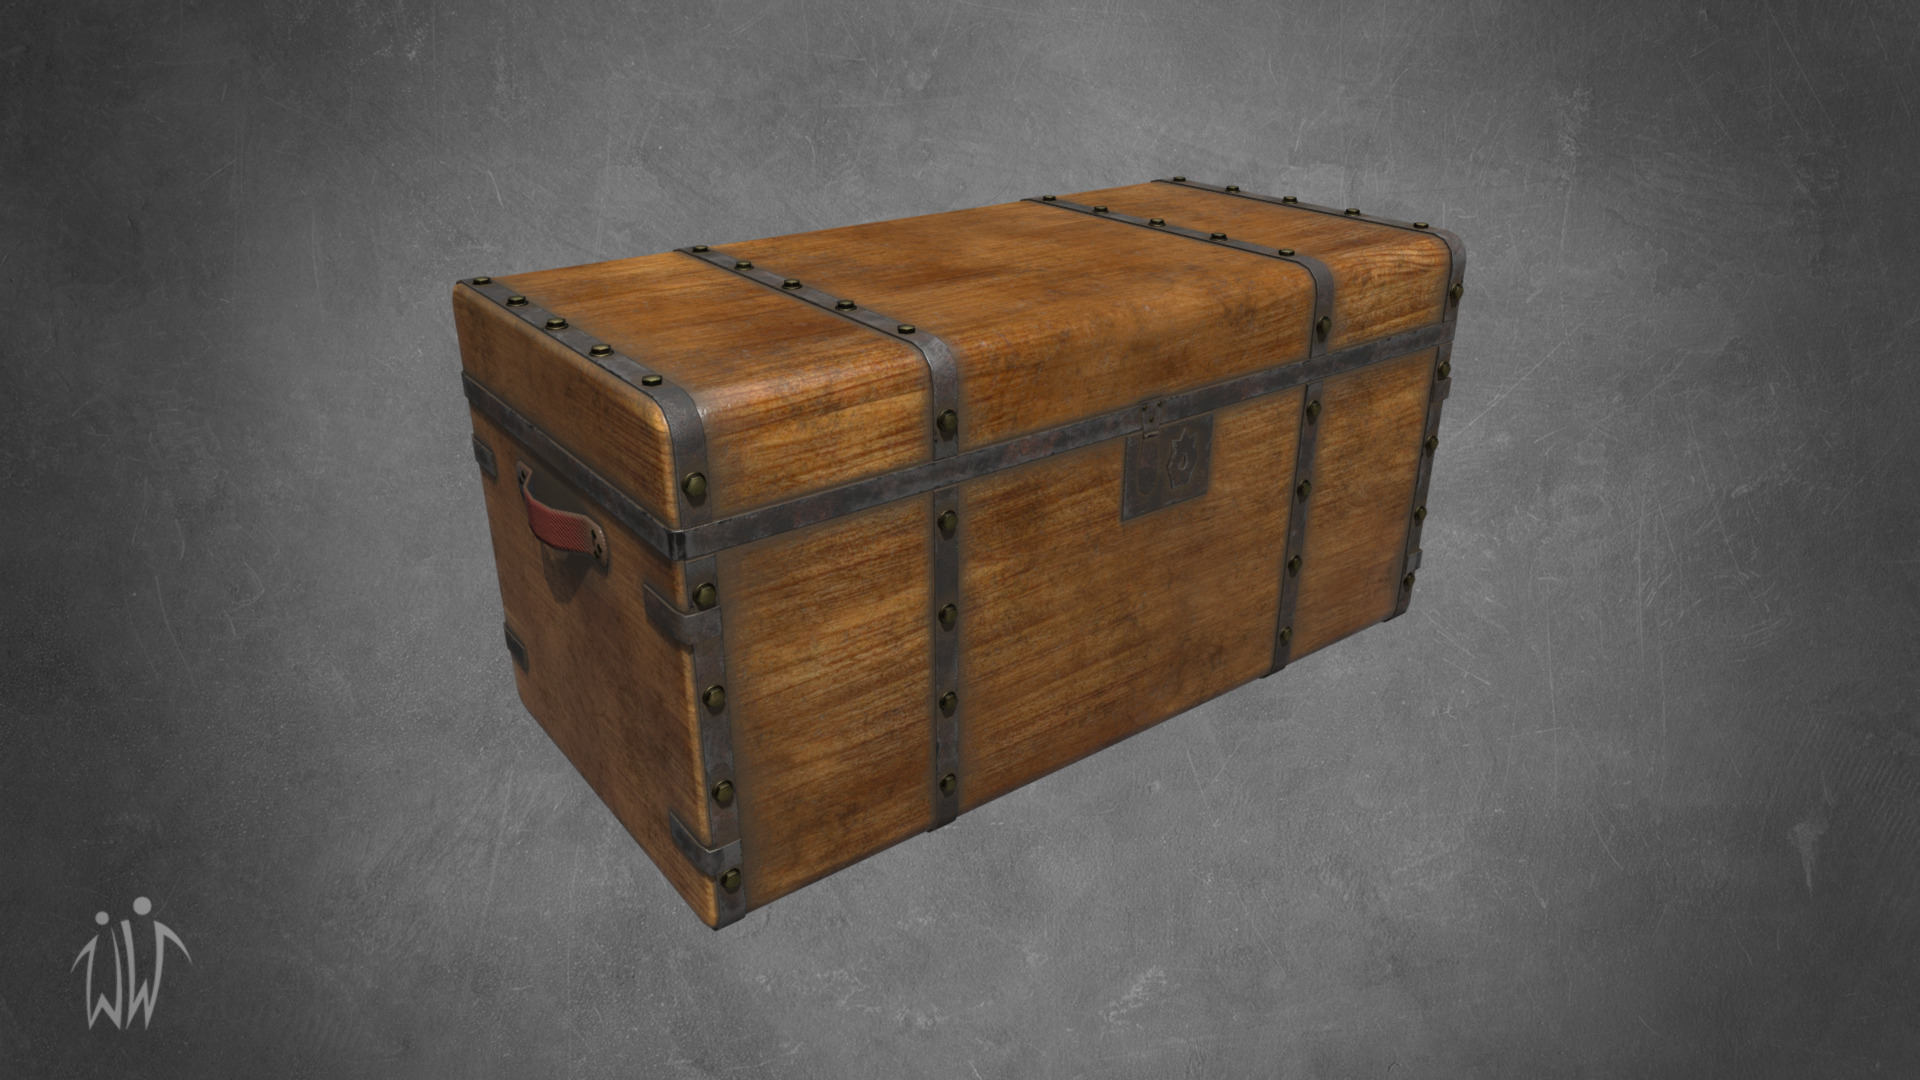 3D model Old Chest - This is a 3D model of the Old Chest. The 3D model is about a wooden box on a grey surface.